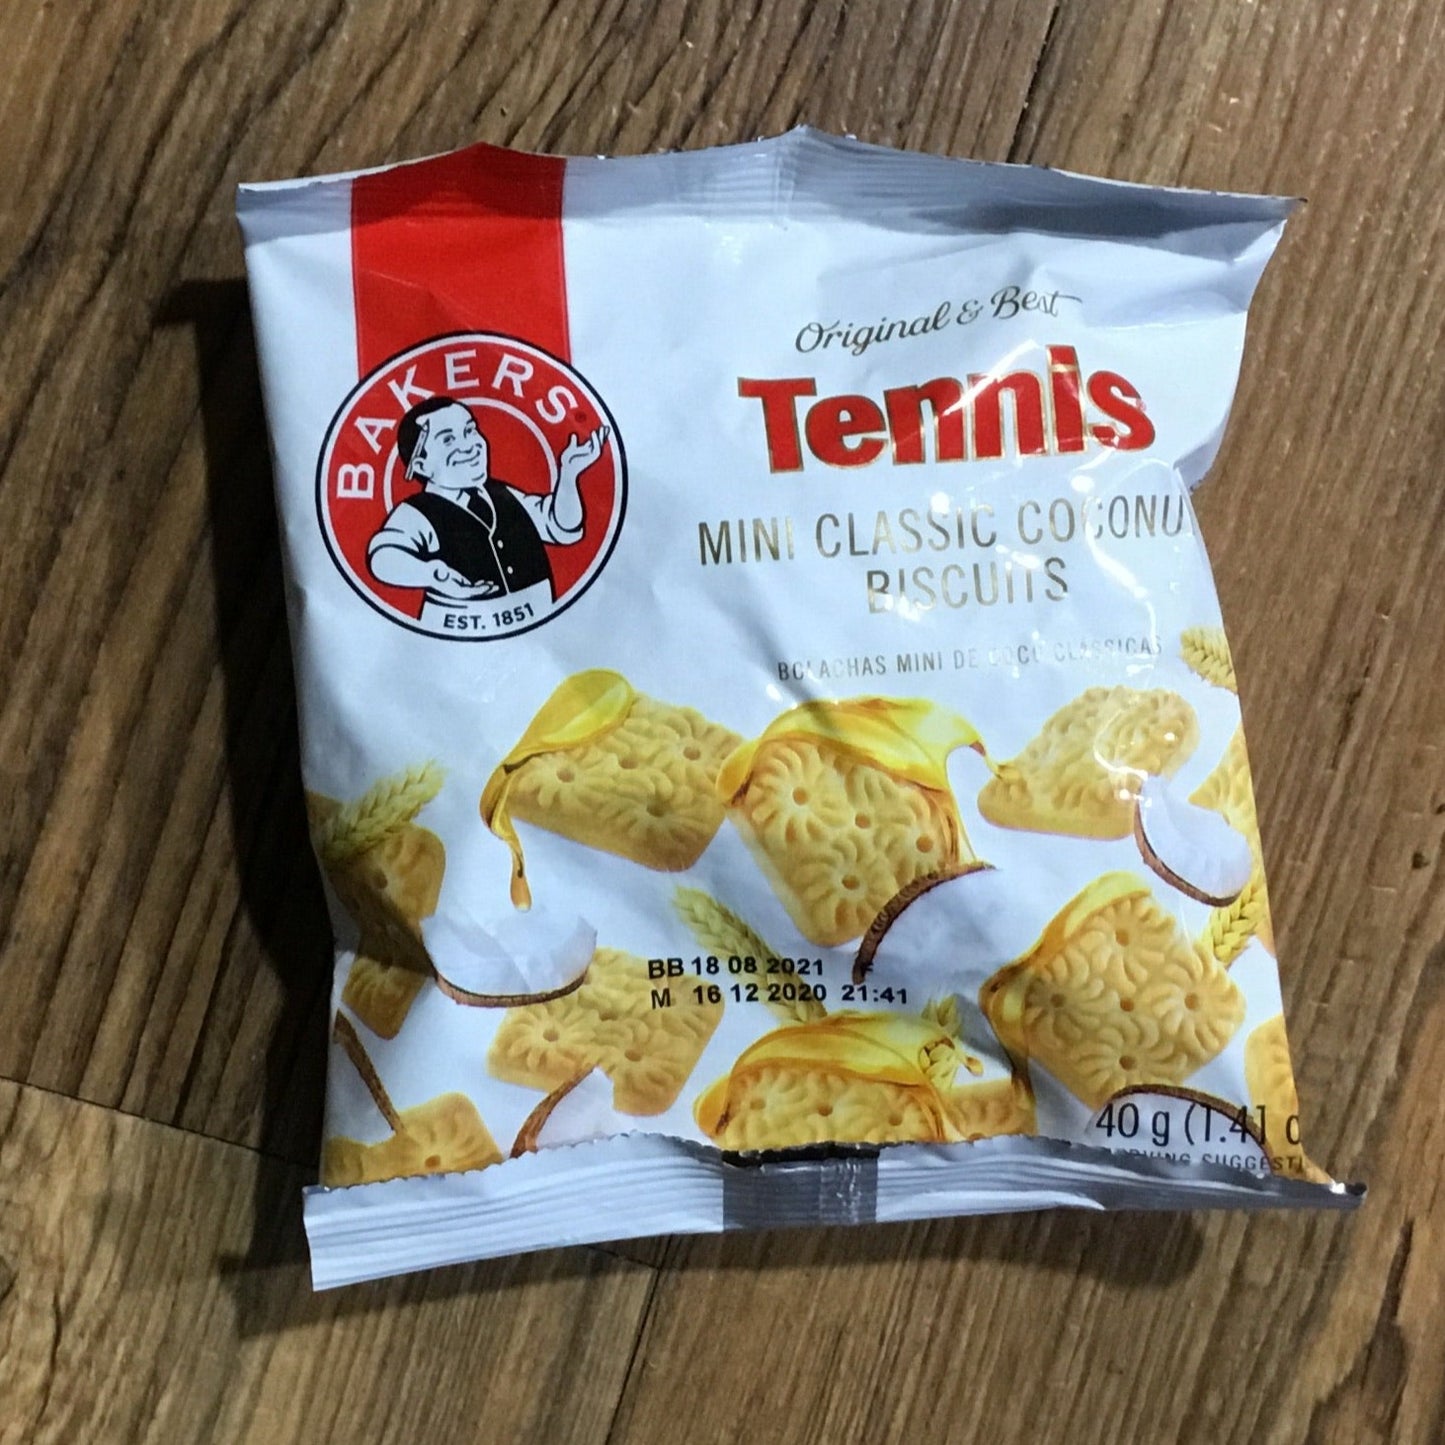 Bakers Mini Tennis Biscuits 40g